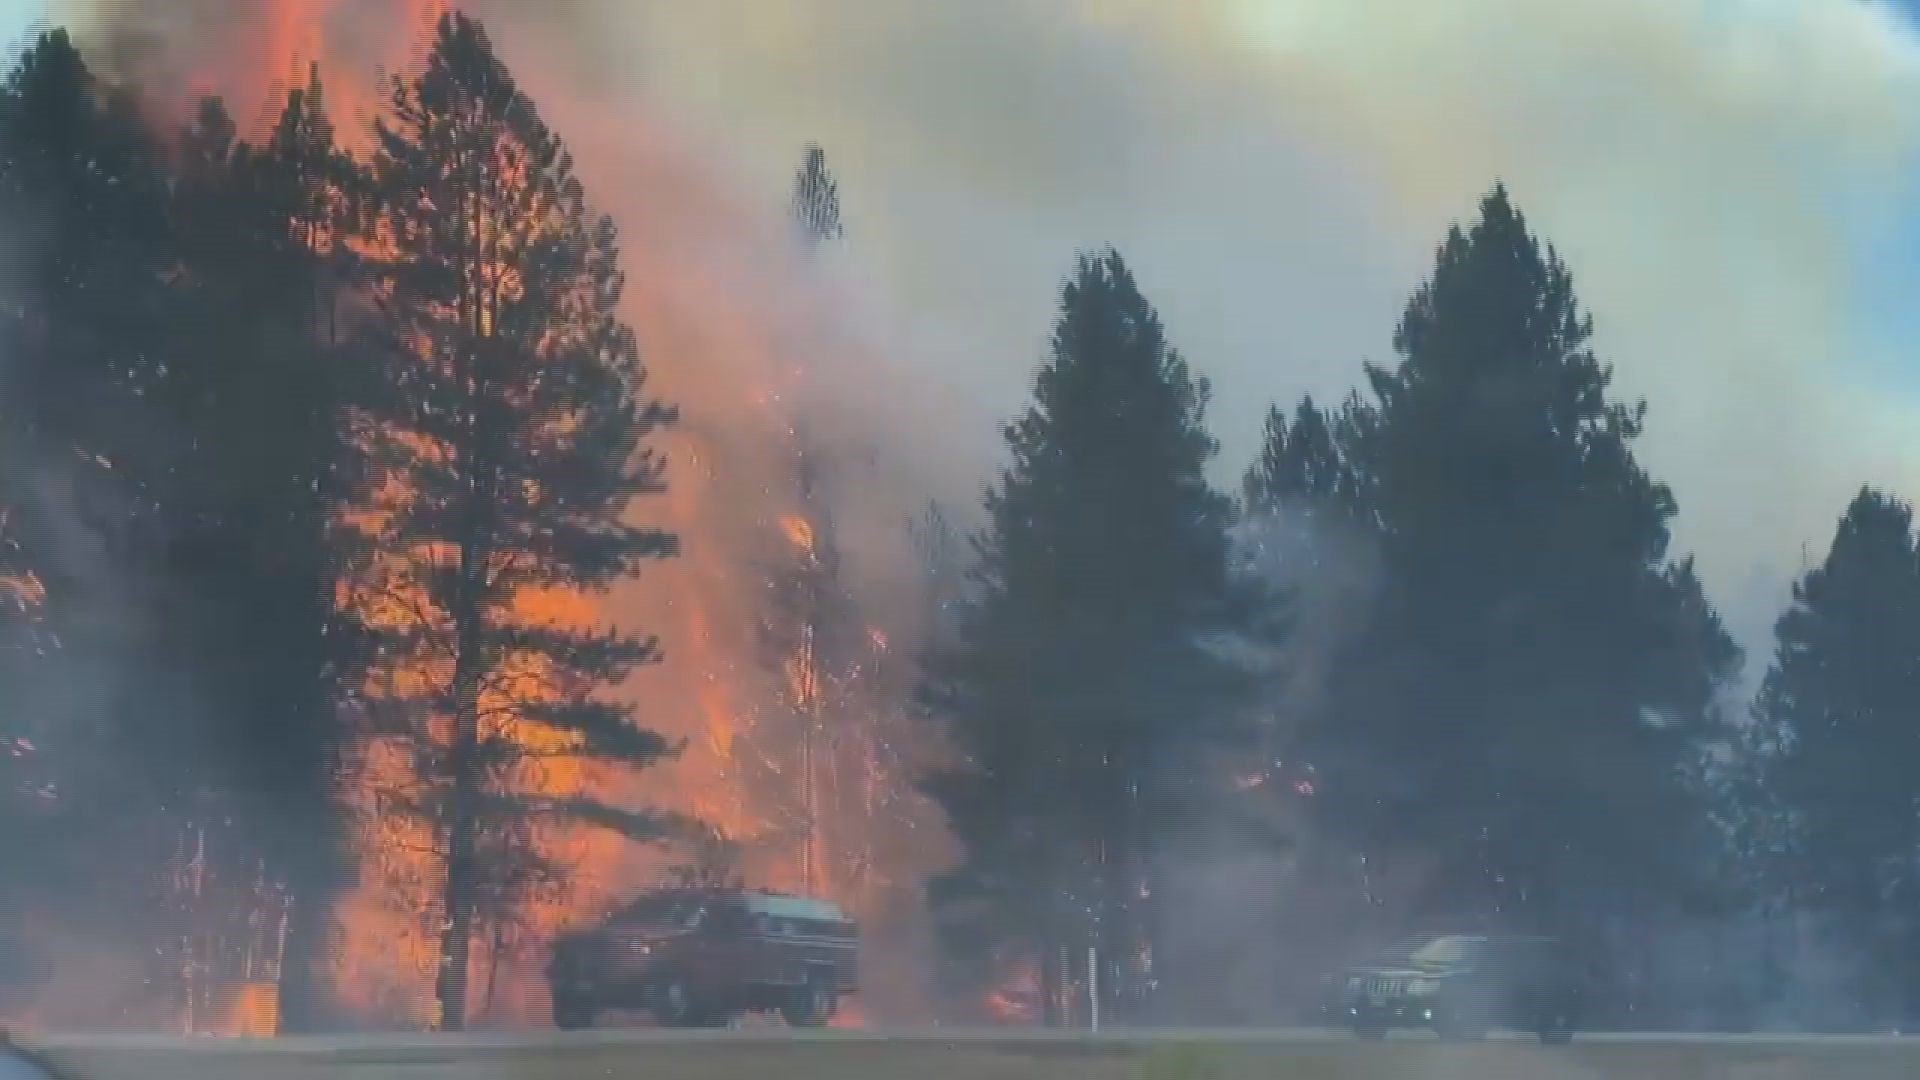 Video from Eric Marquardt. A brush fire shut down Interstate 90 near Cle Elum on July 23, 2021.